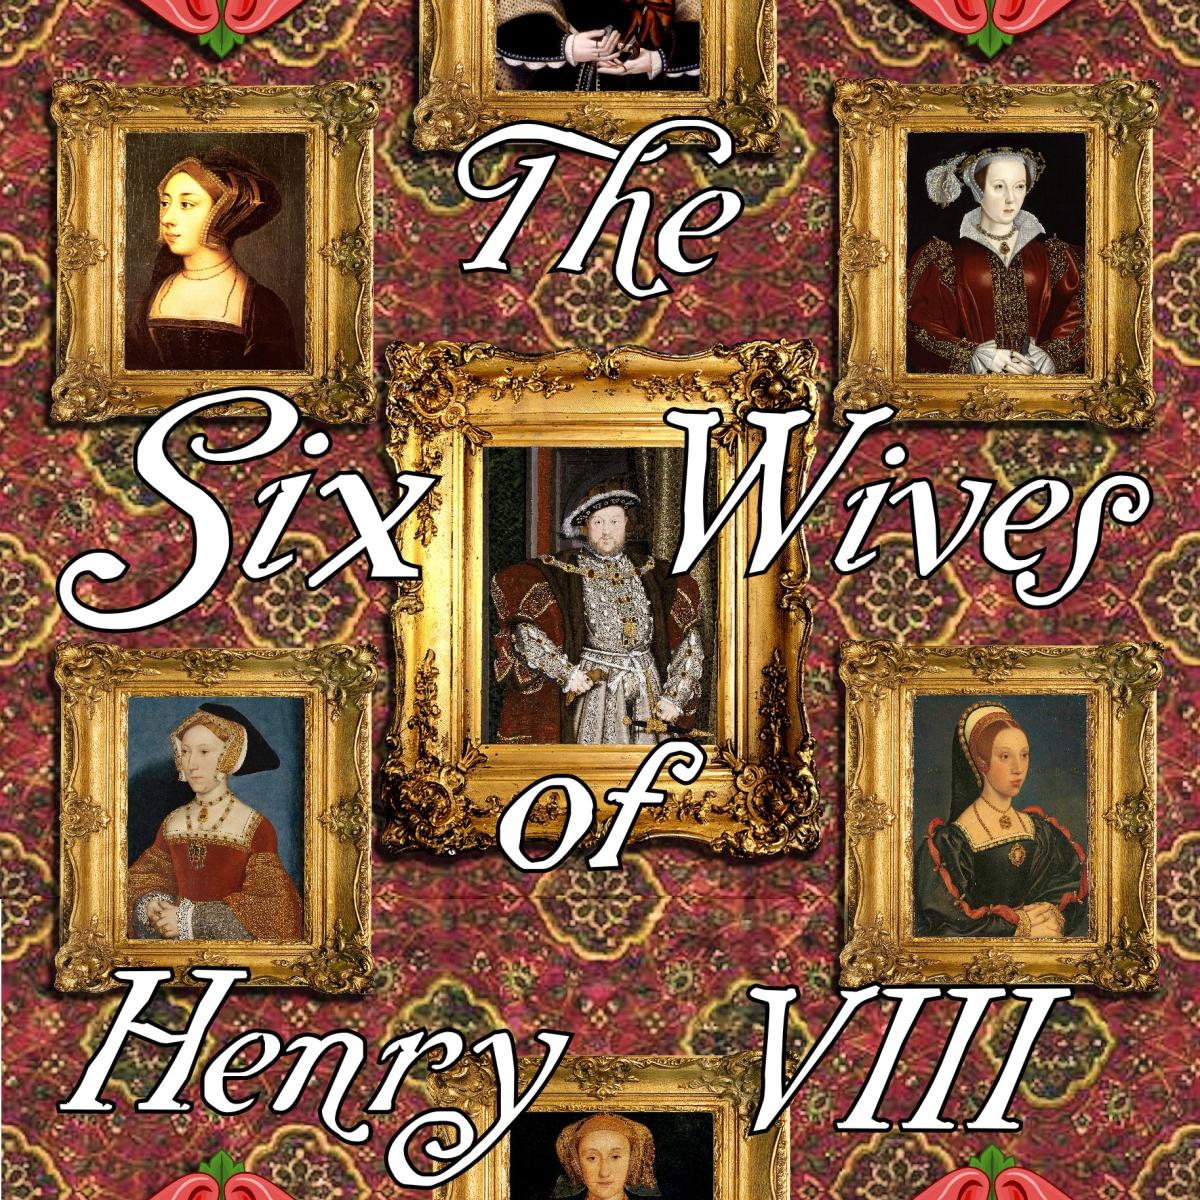 historical framed portraits of Henry VIII and his 6 wives